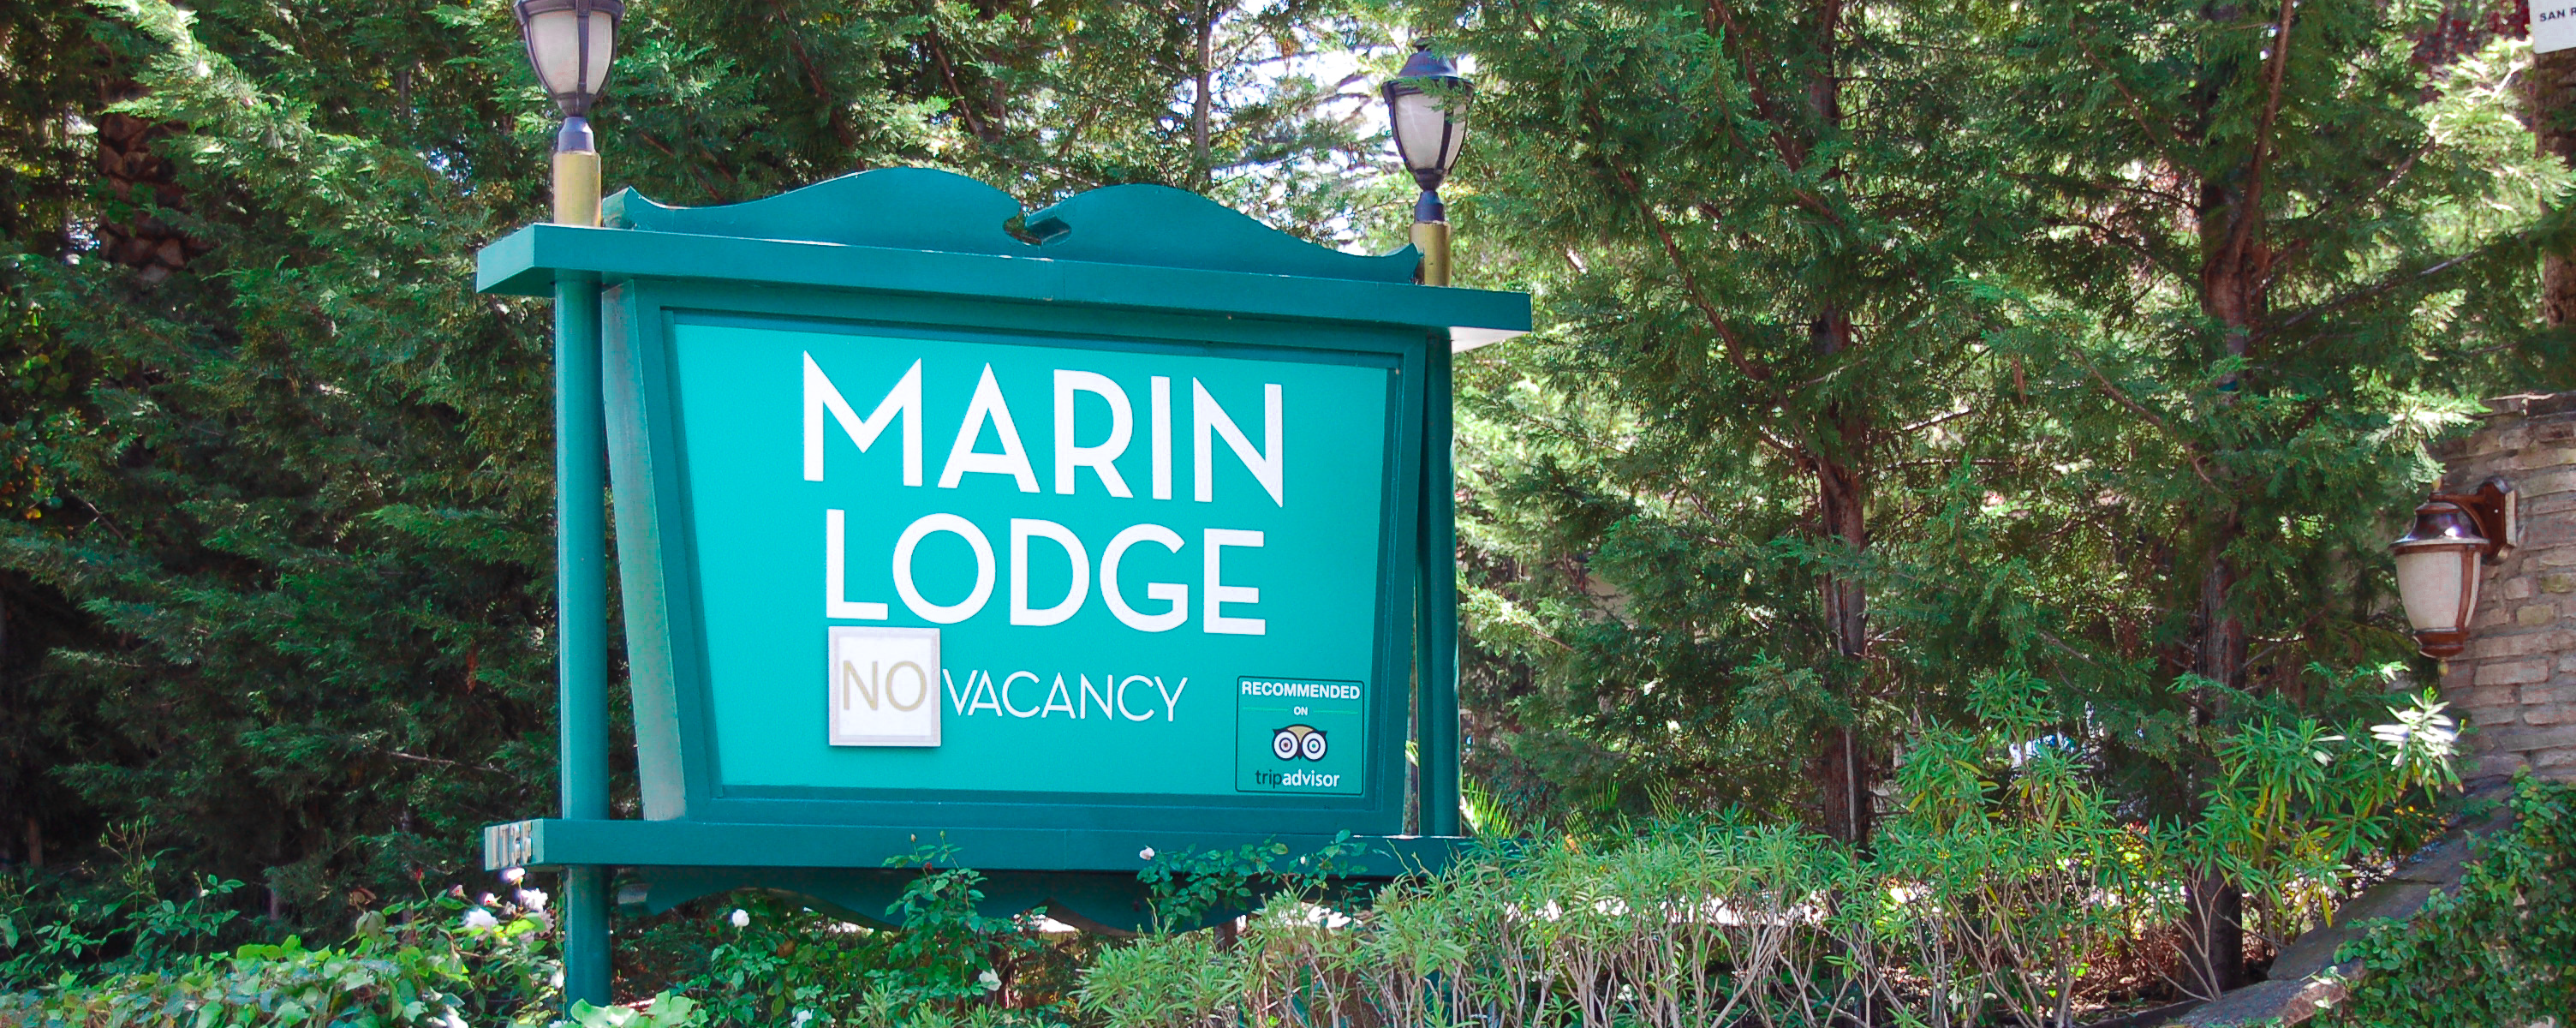 The main sign of the Marin Lodge